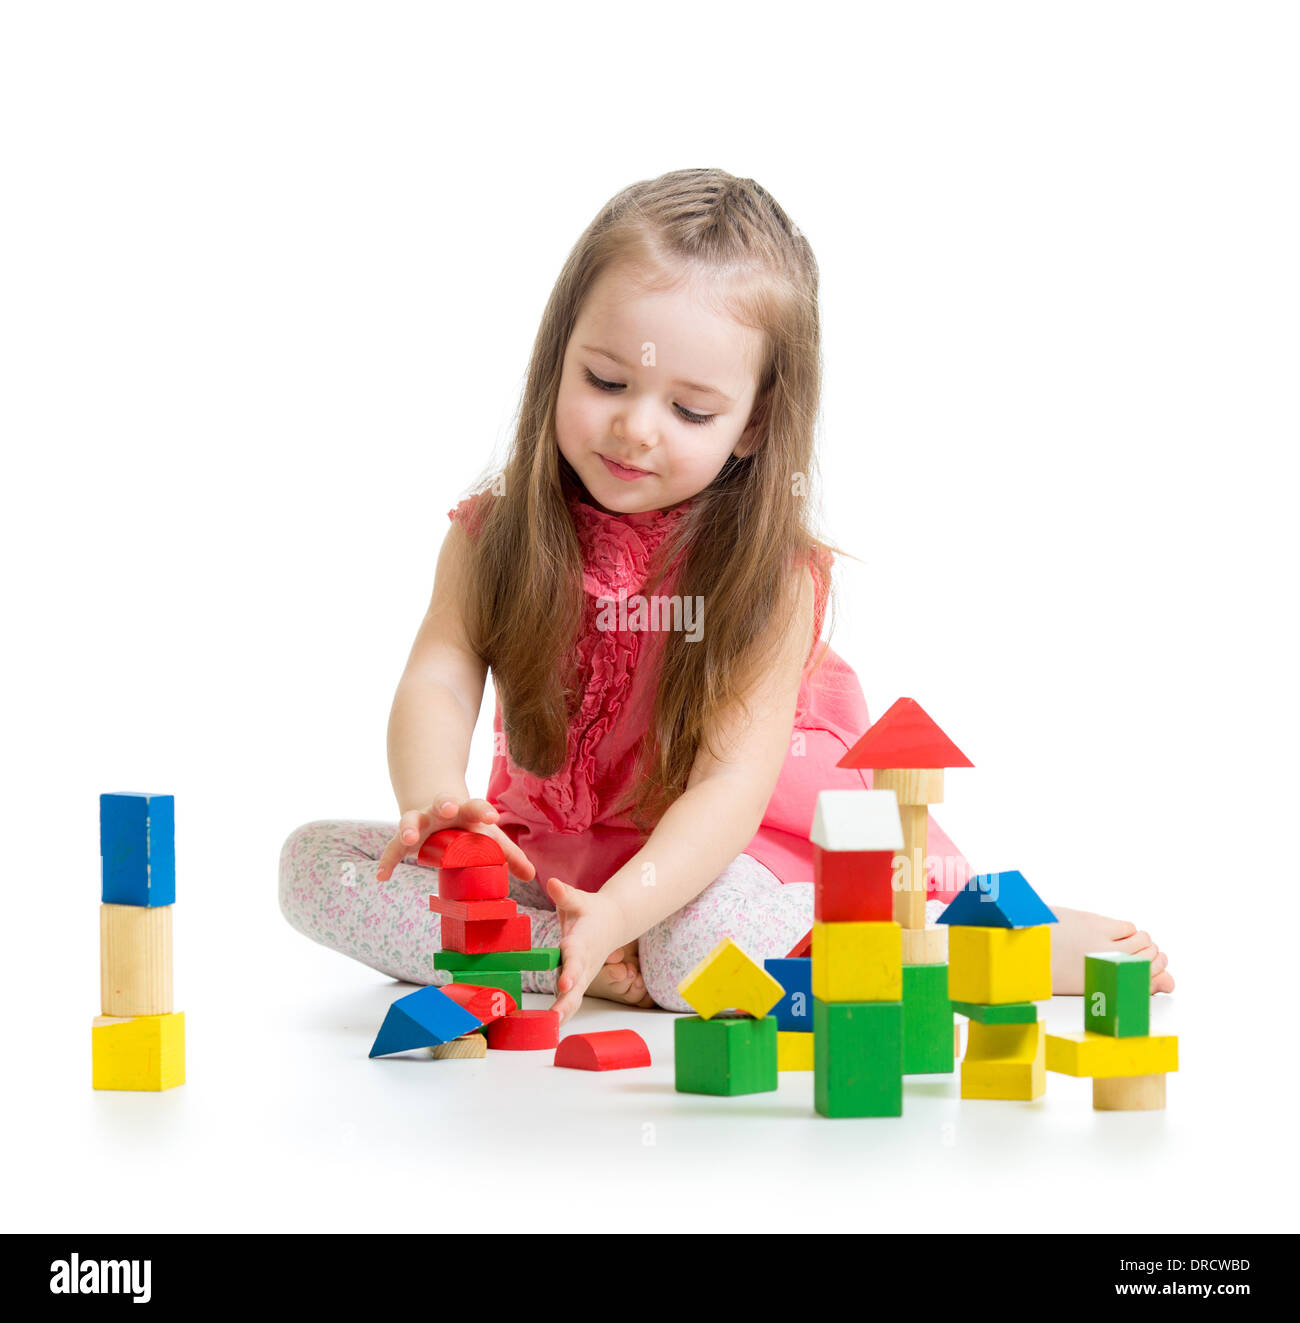 child girl playing with colorful building block toys Stock Photo